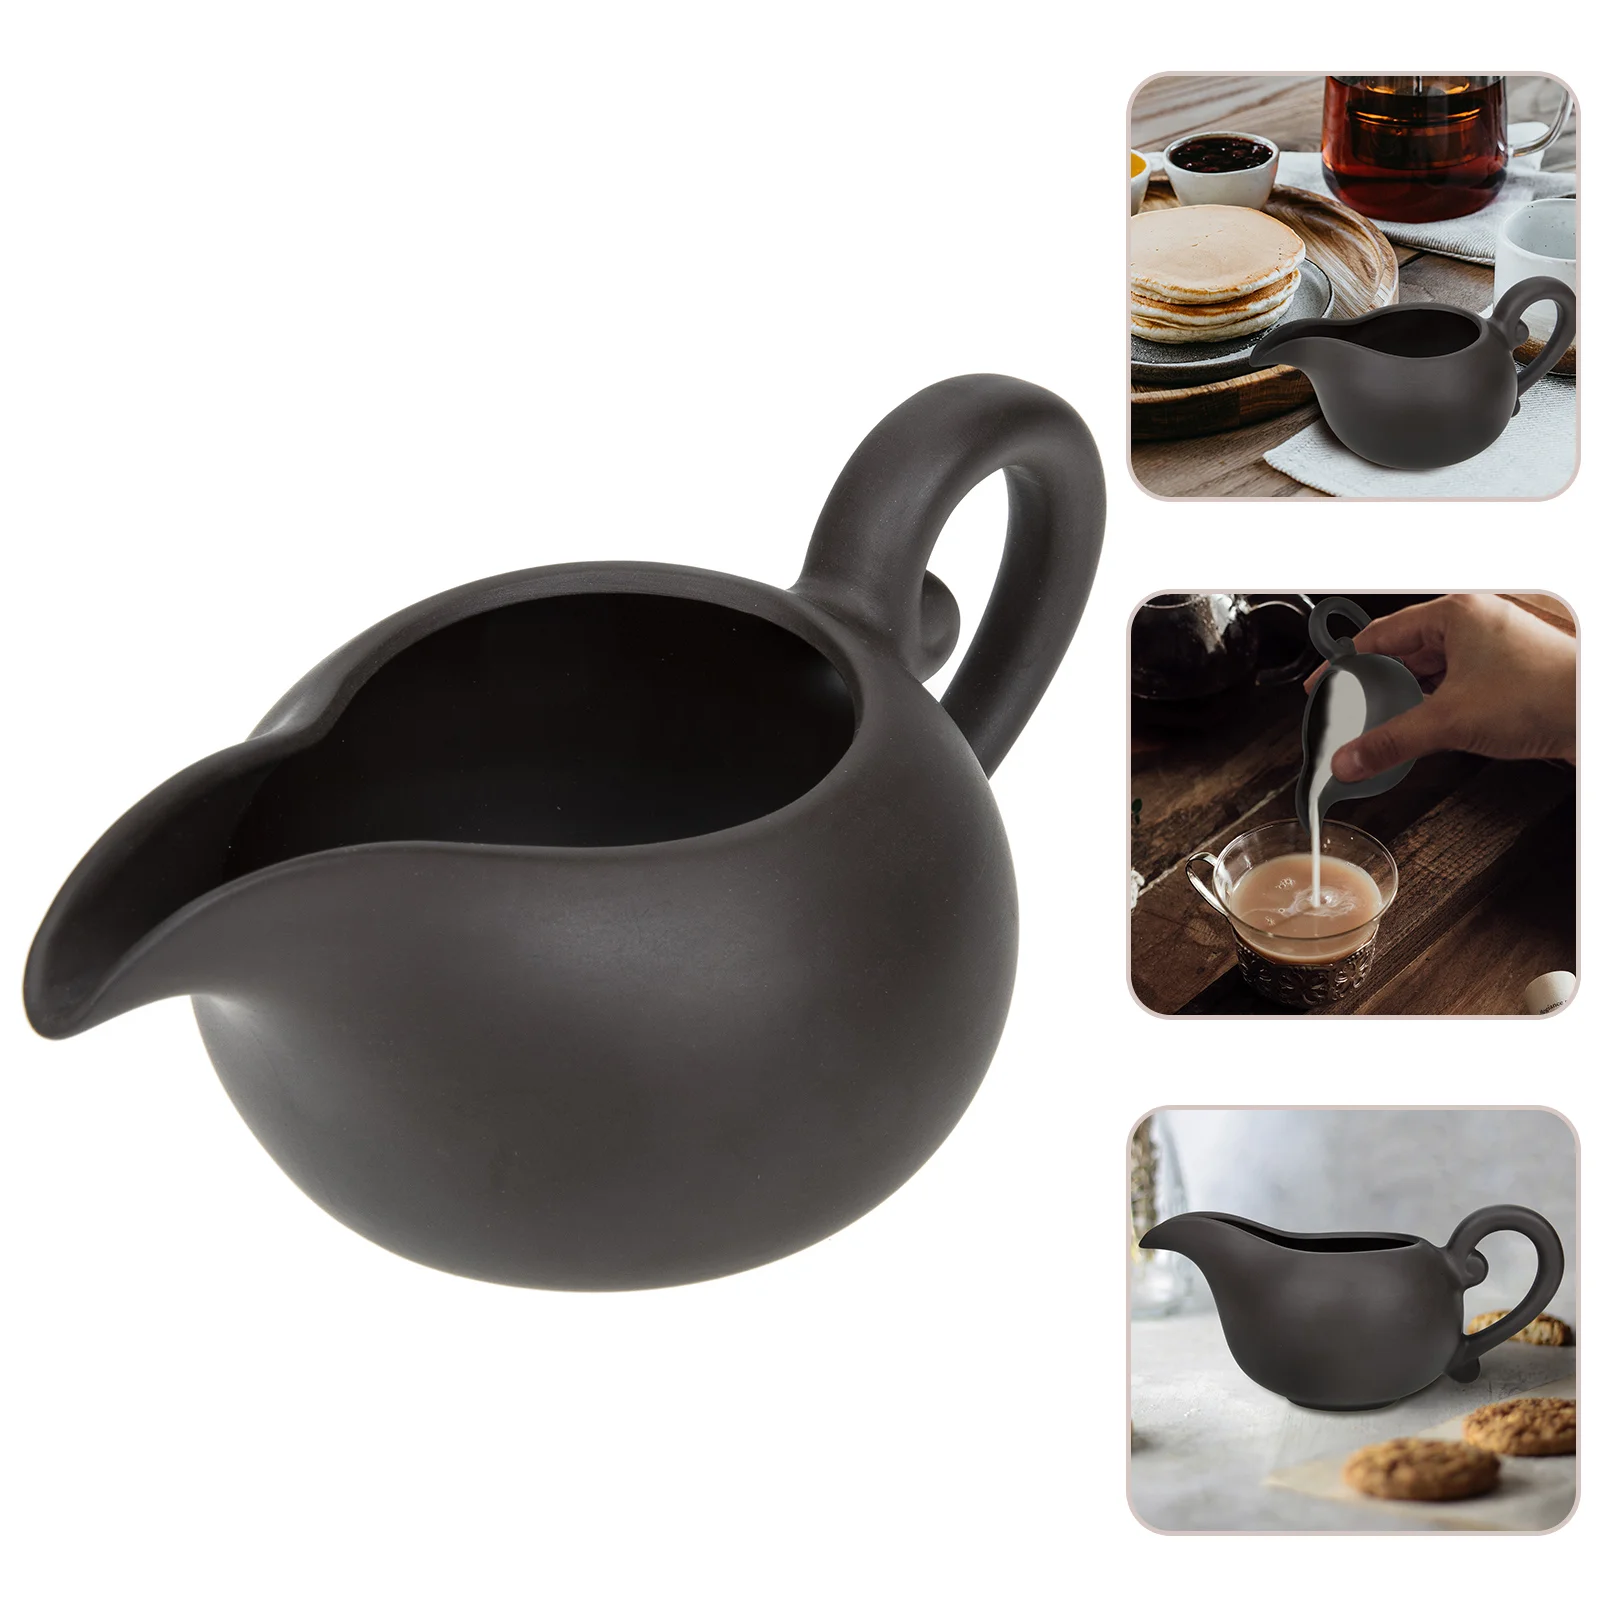 

Pitcher Creamer Sauce Ceramic Jug Gravy Boat Coffee Pourer Cup Tea Serving Frothing Mini Salad Dressing Seasoning Container Bowl